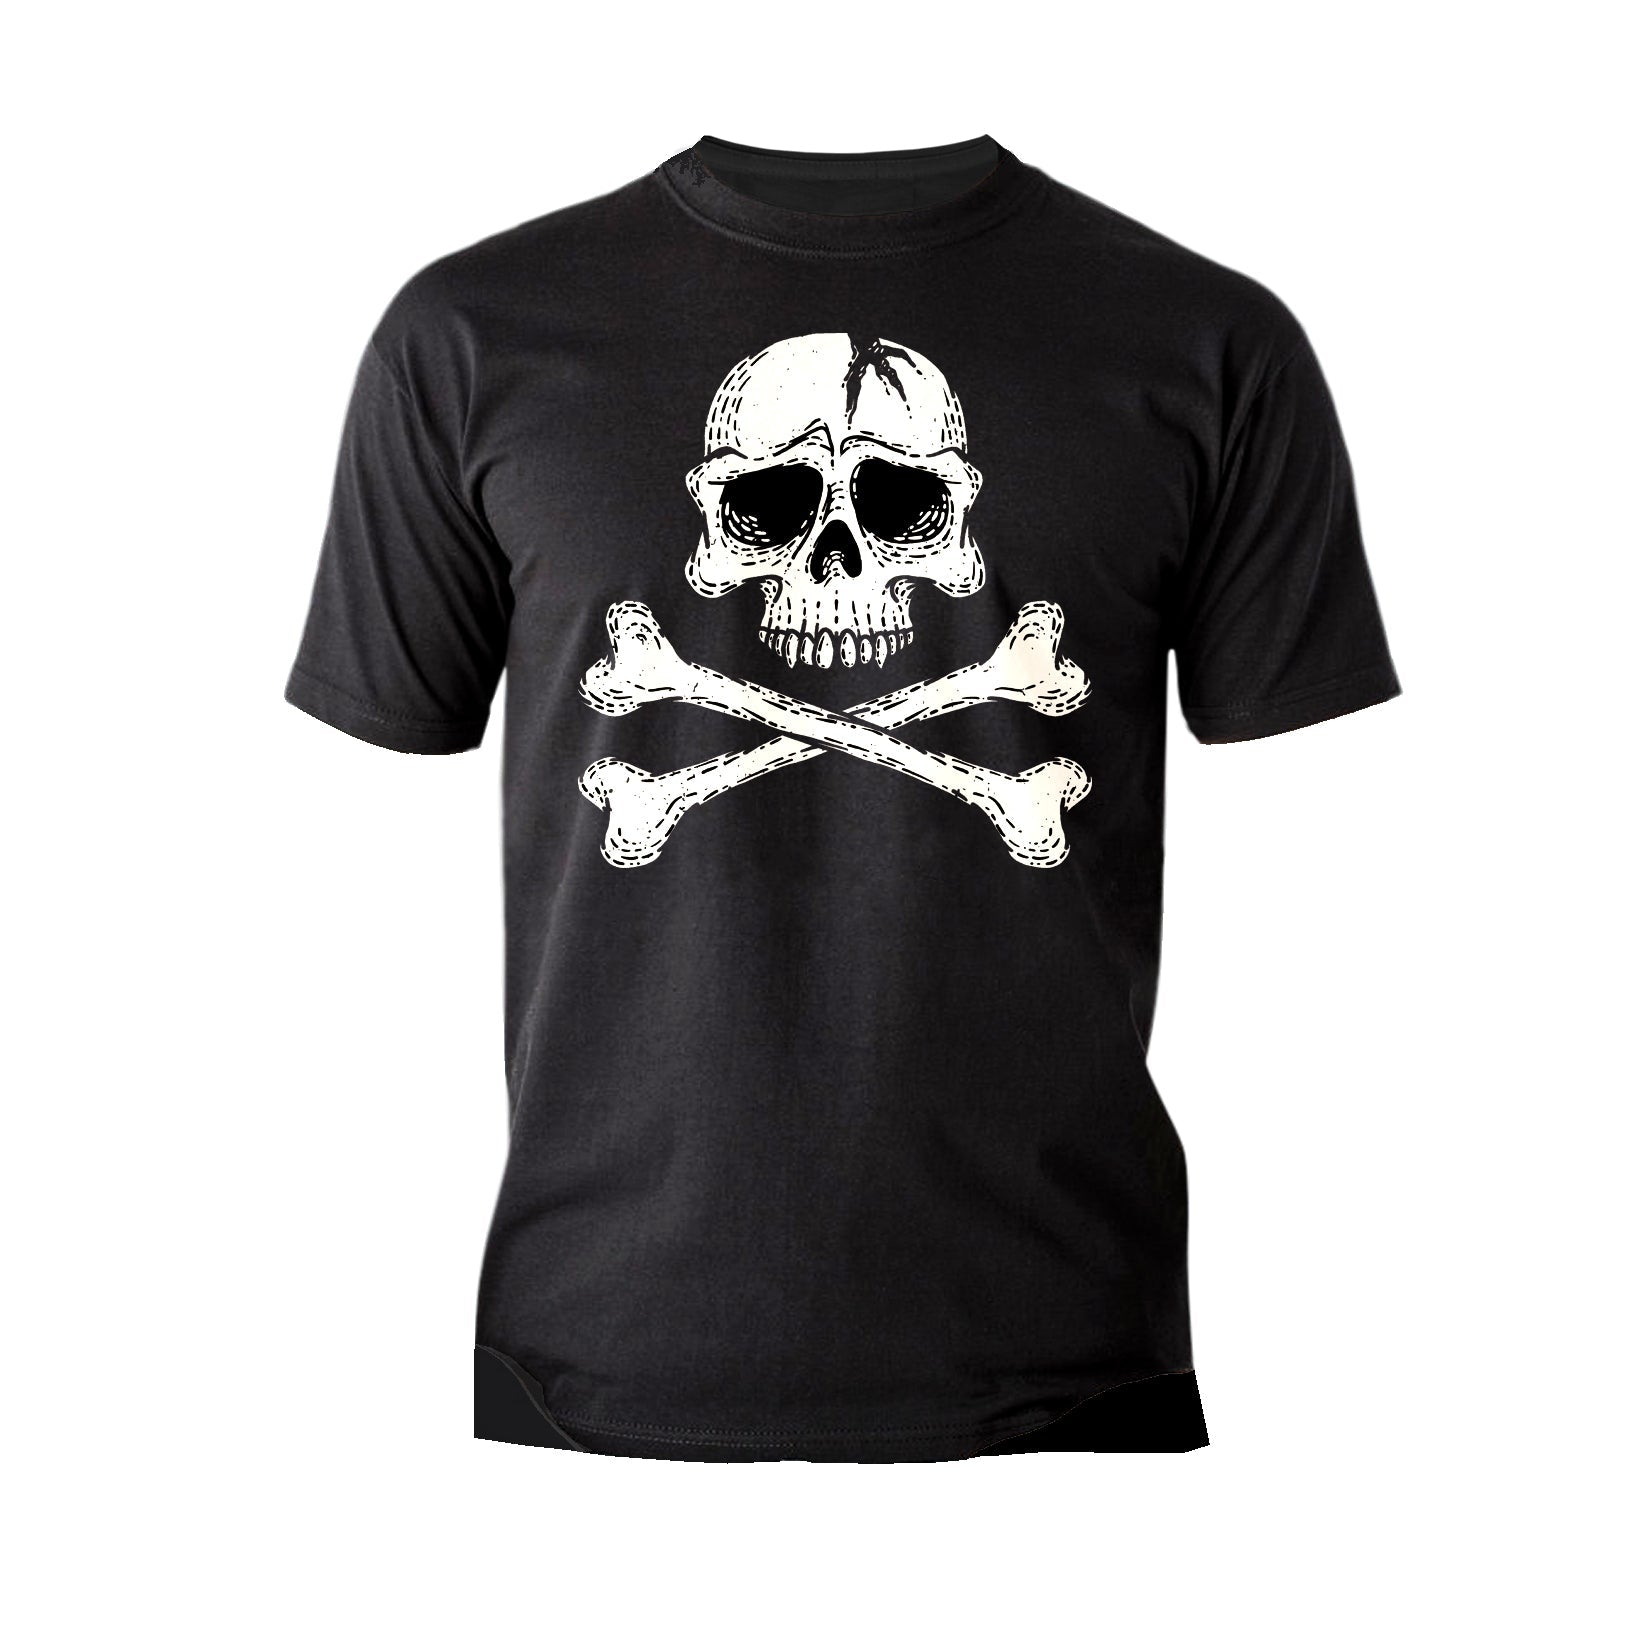 Halloween Horror Pirate Skull And Crossbones Edgy Cool Scary Official Men's T-shirt